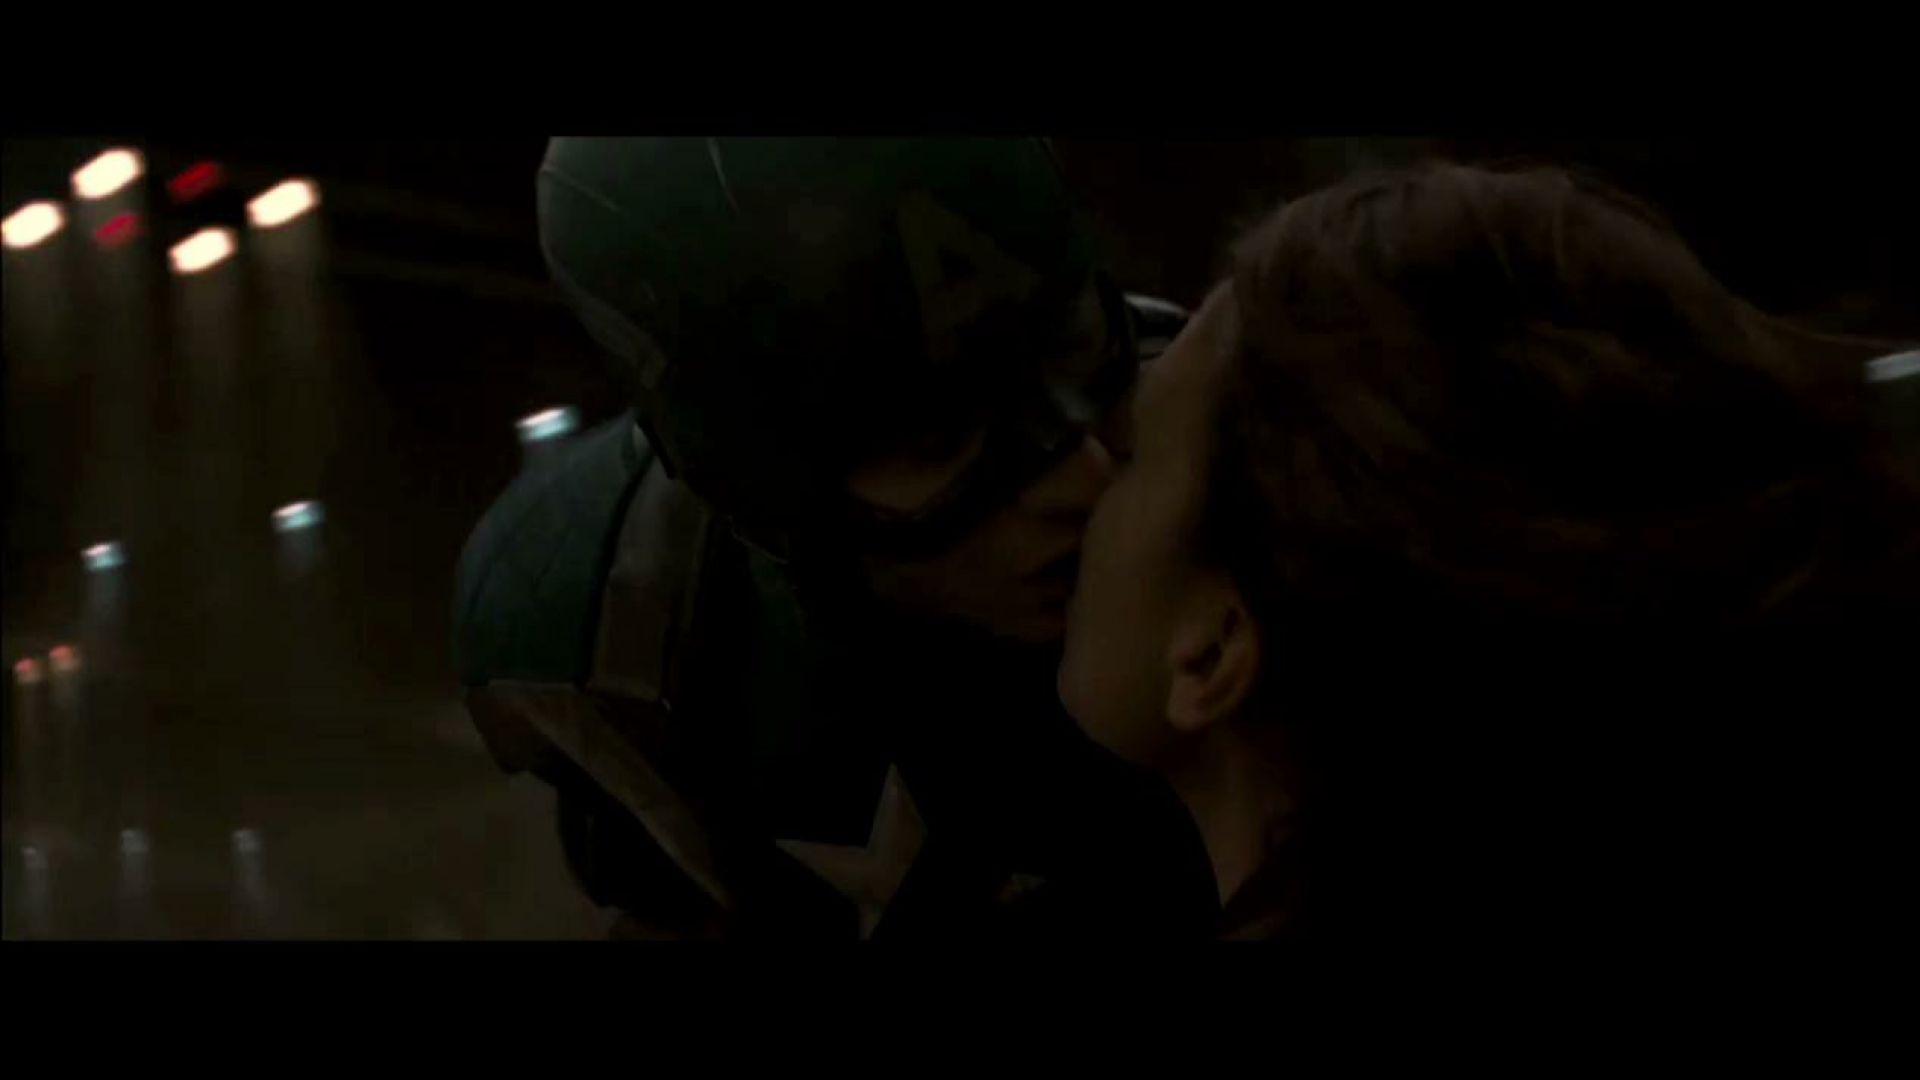 Captain America jumps out of car, onto plane after kissing Peggy